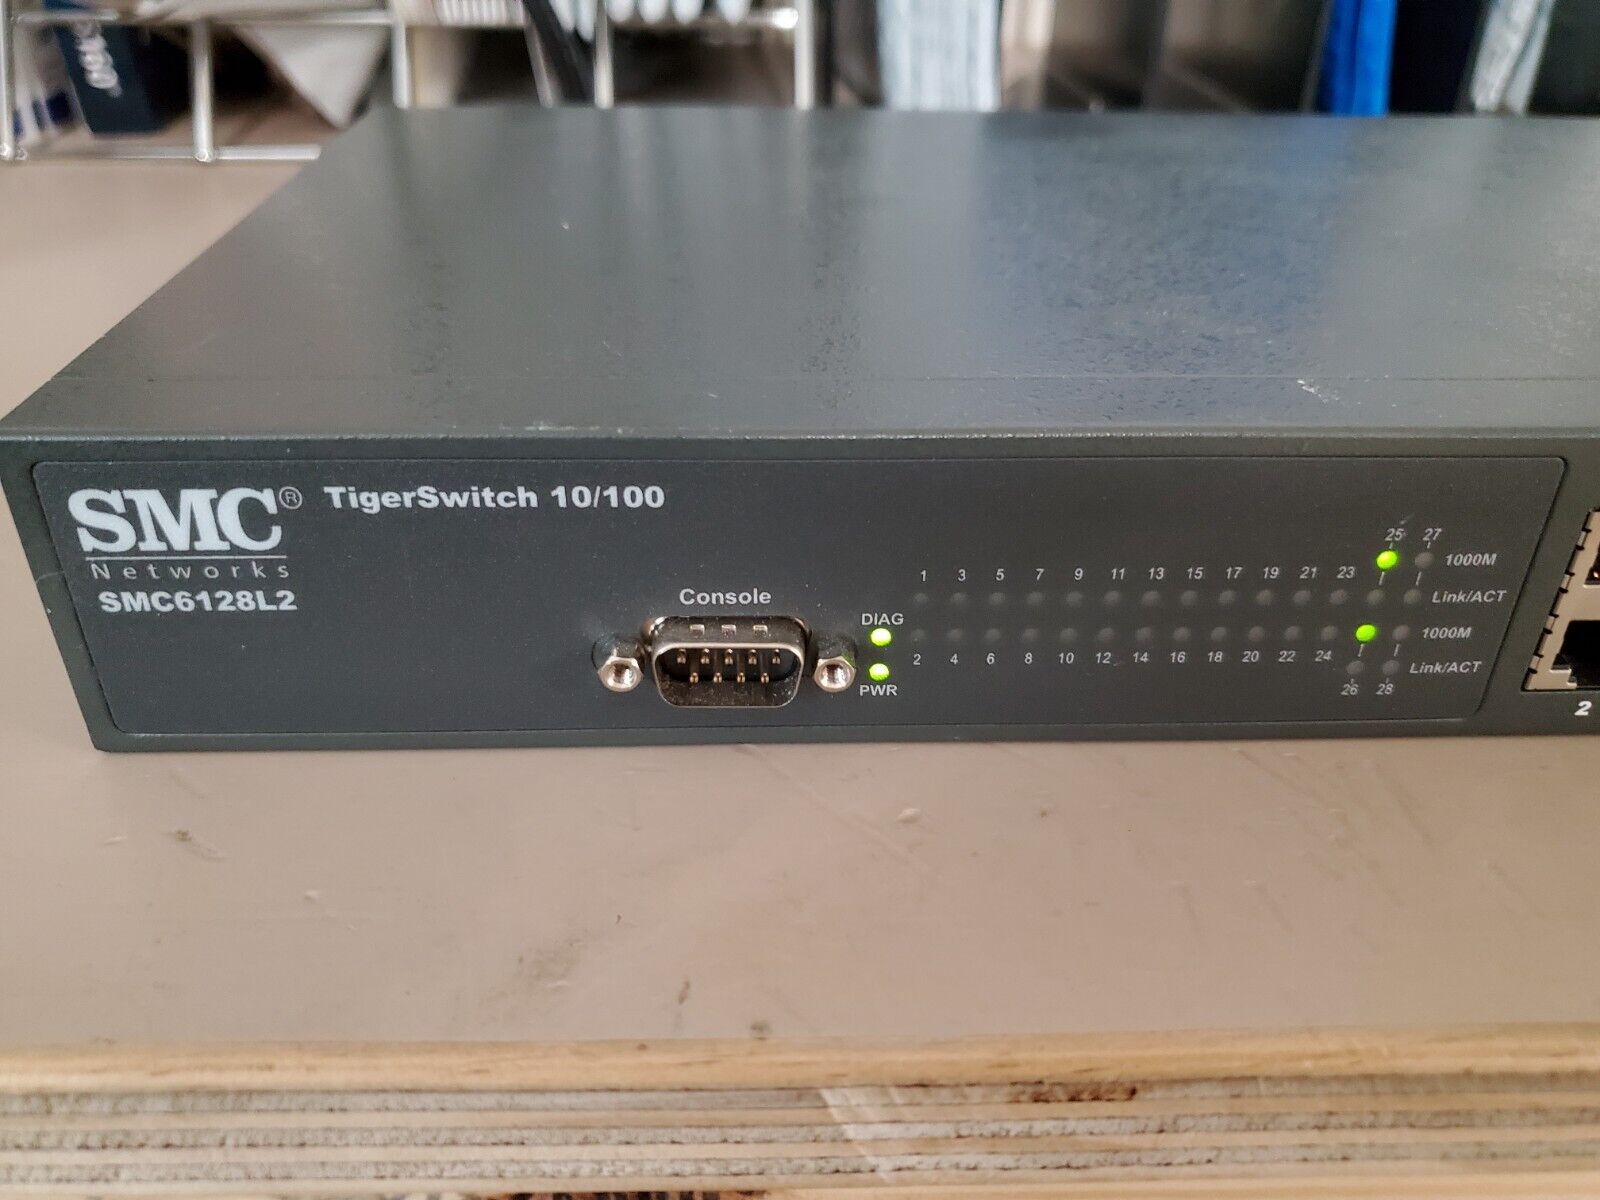 SMC Networks TigerSwitch 10/100 SMC6128L2 24-Port Managed Switch Tested w/ Cable